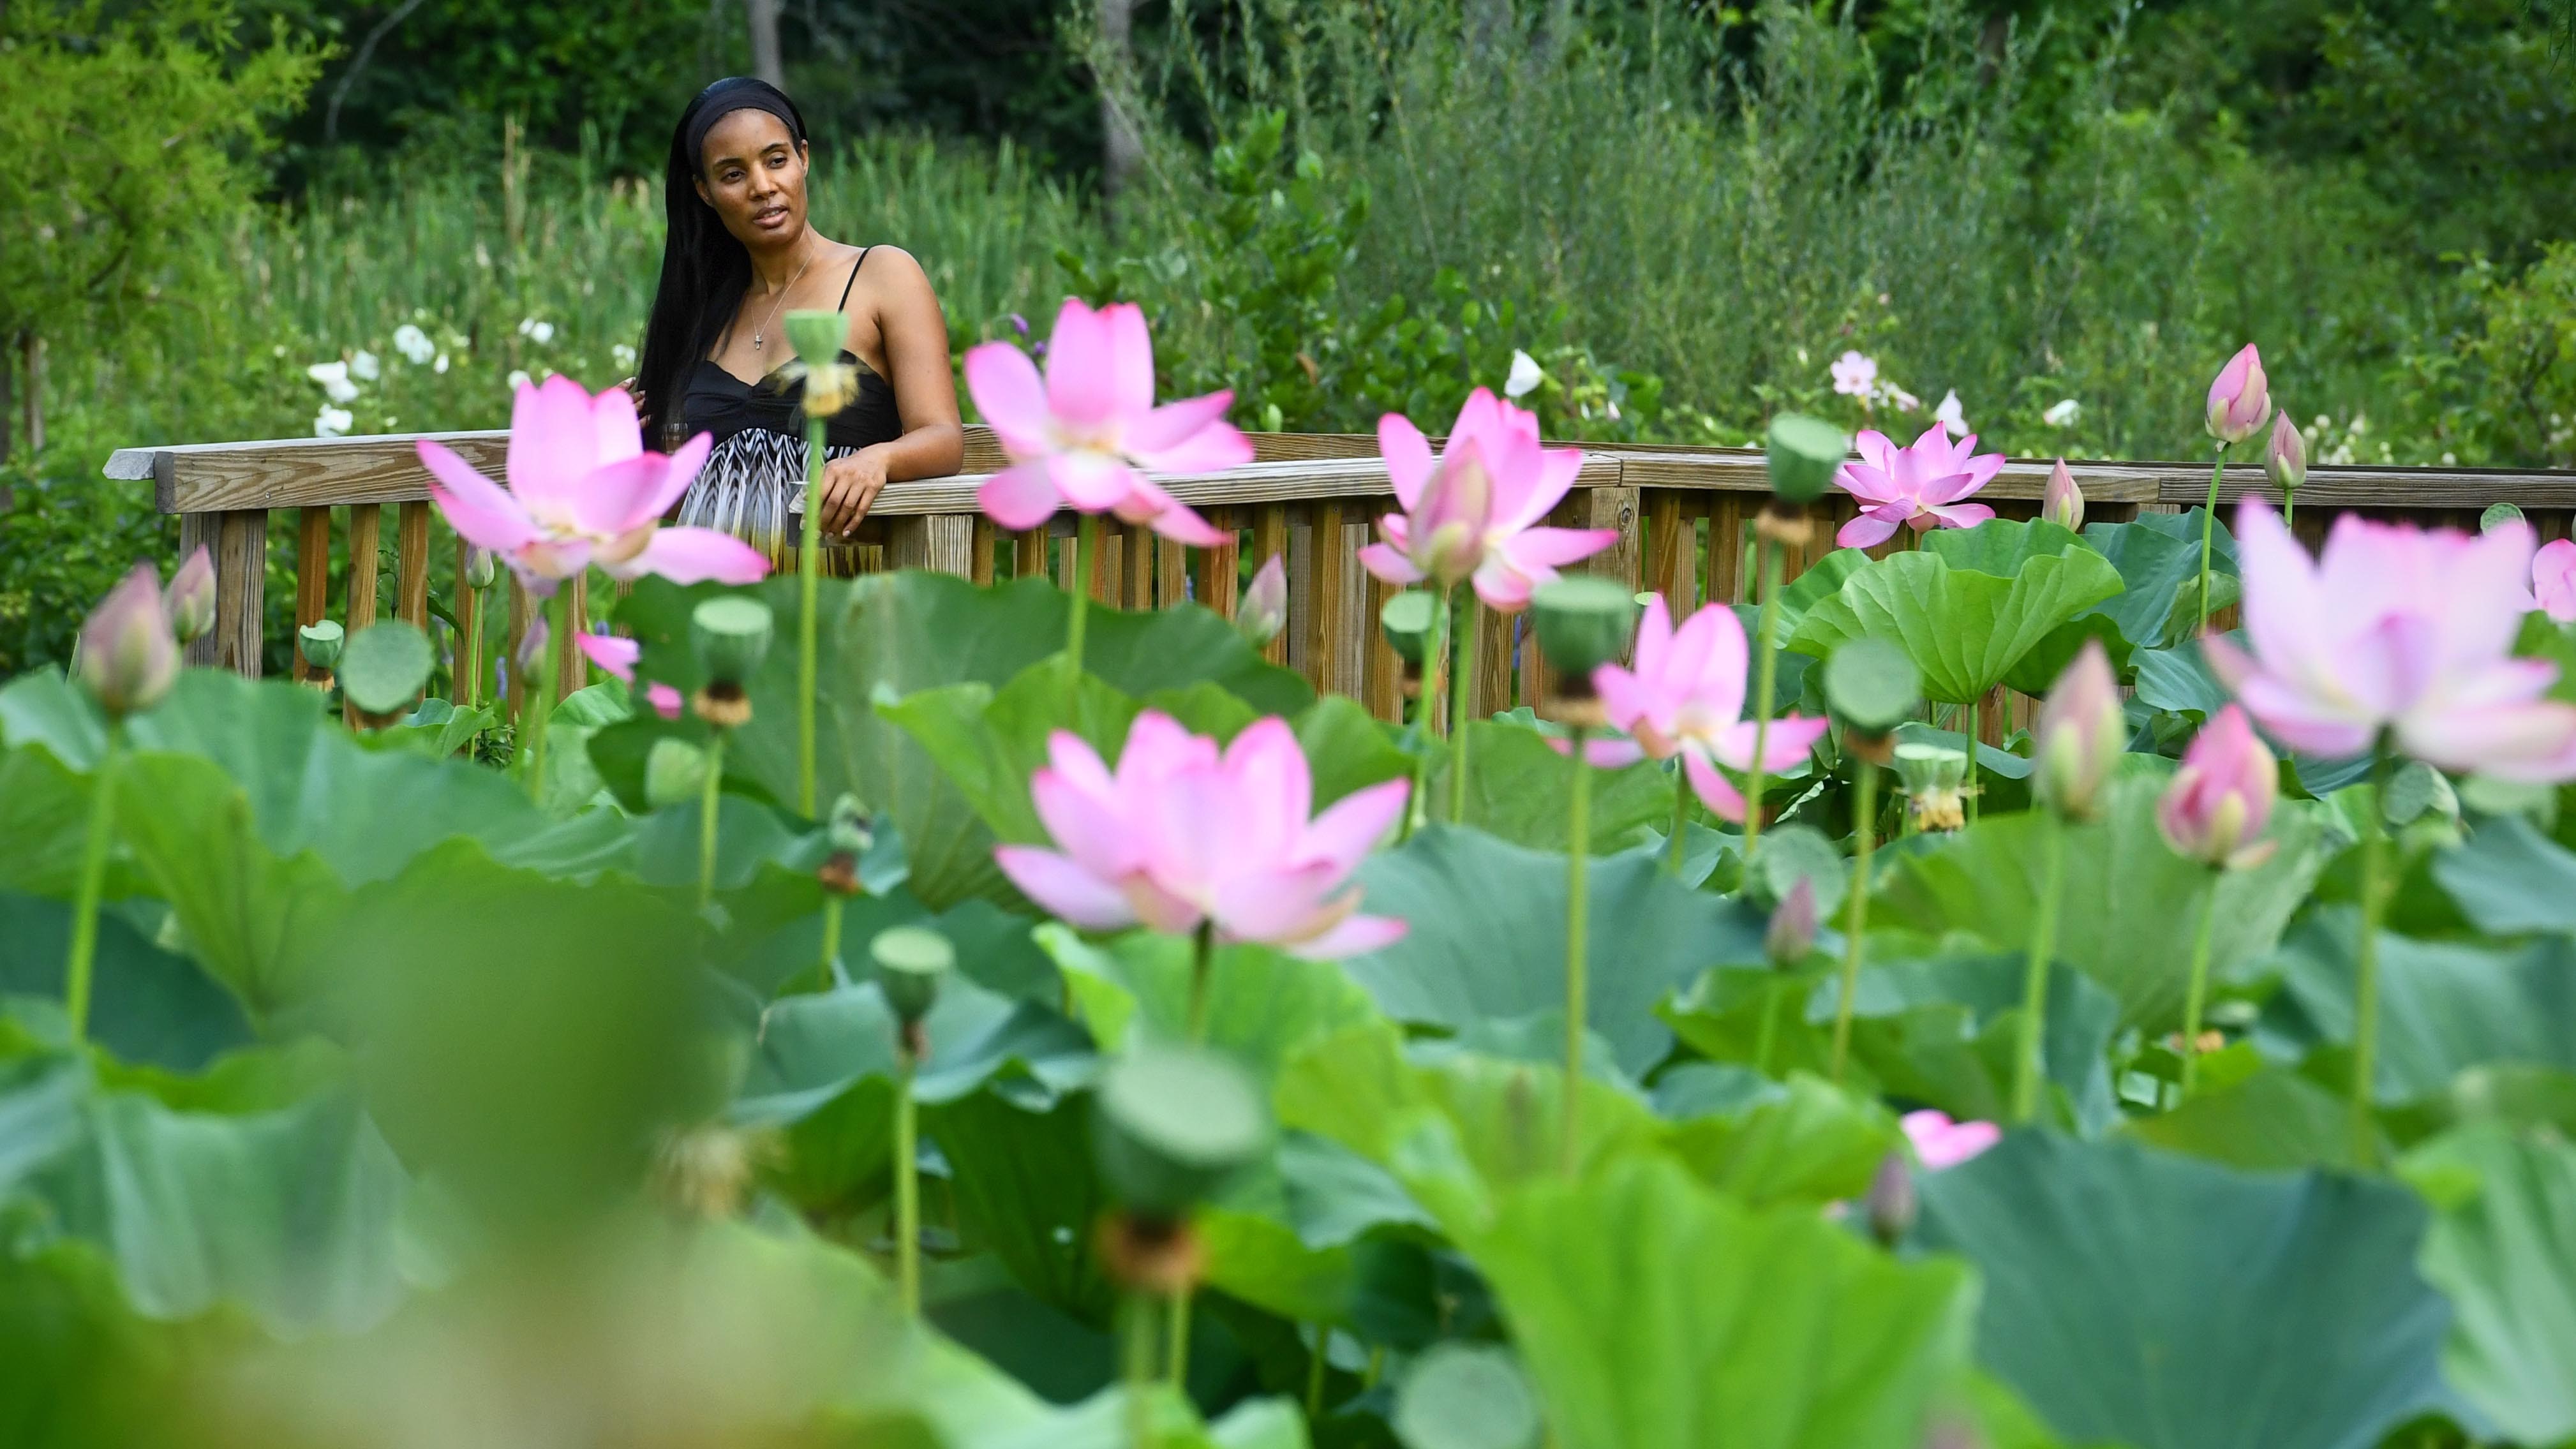 Petal party: Lotus and Water Lily Festival to bloom at Kenilworth Aquatic Gardens 